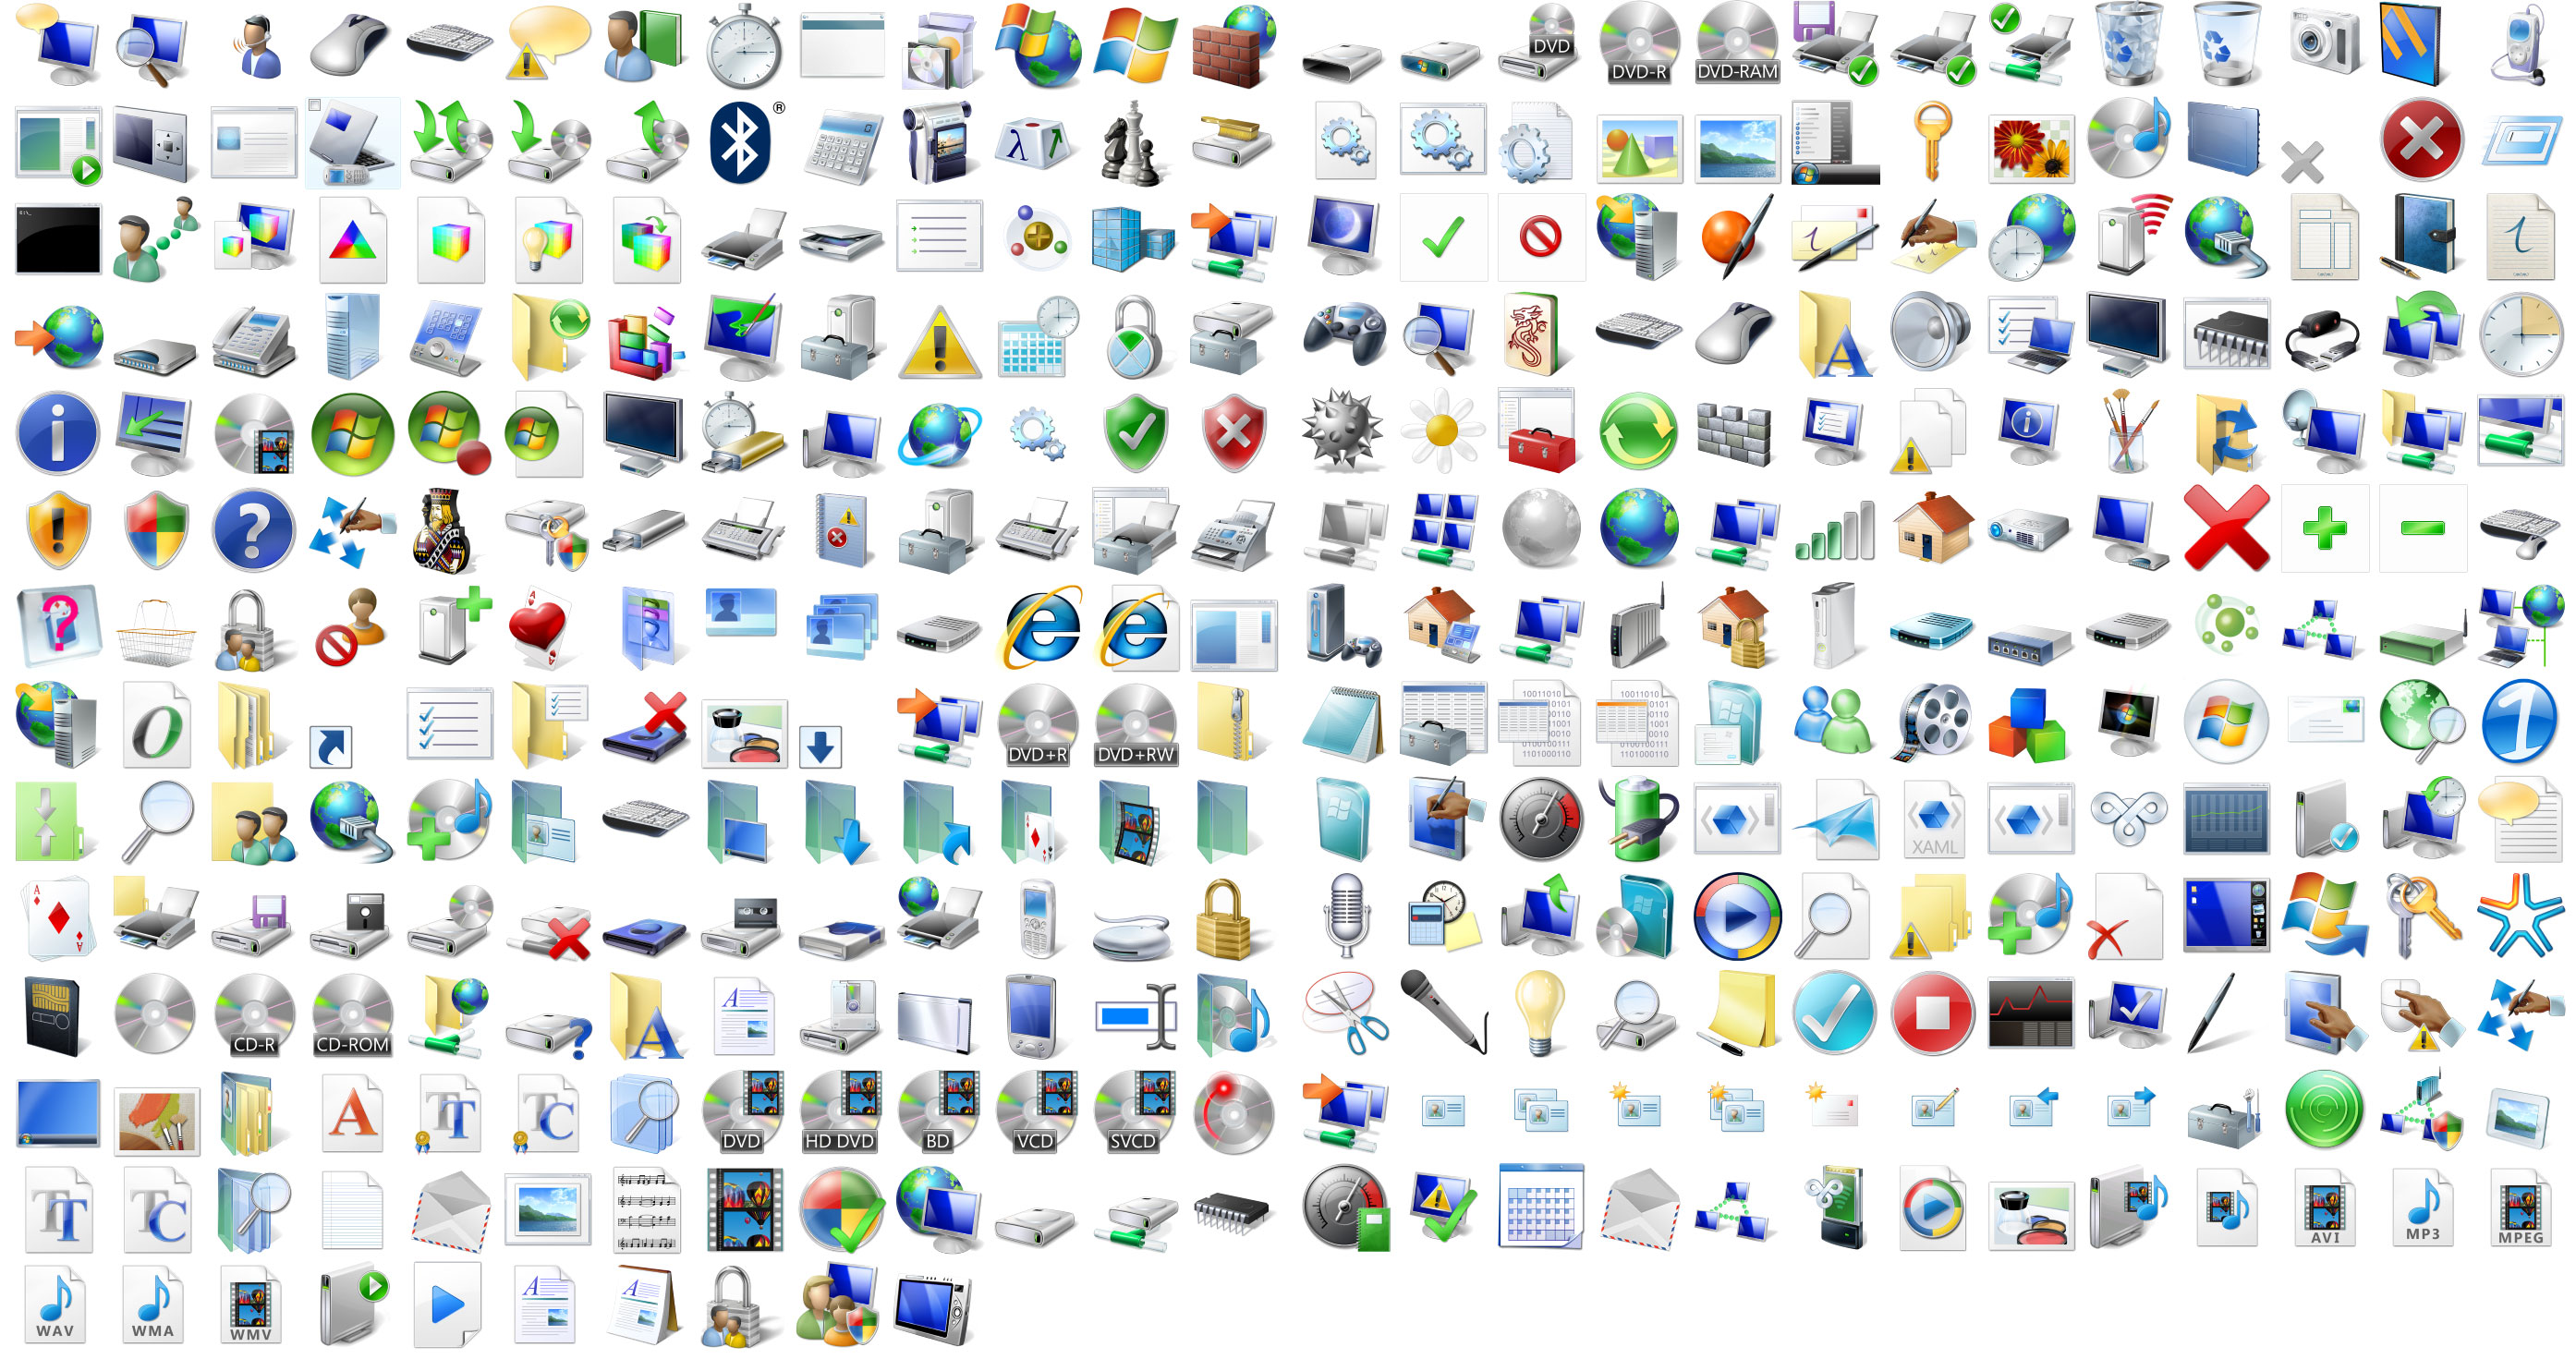 folder icons for windows 10 free download